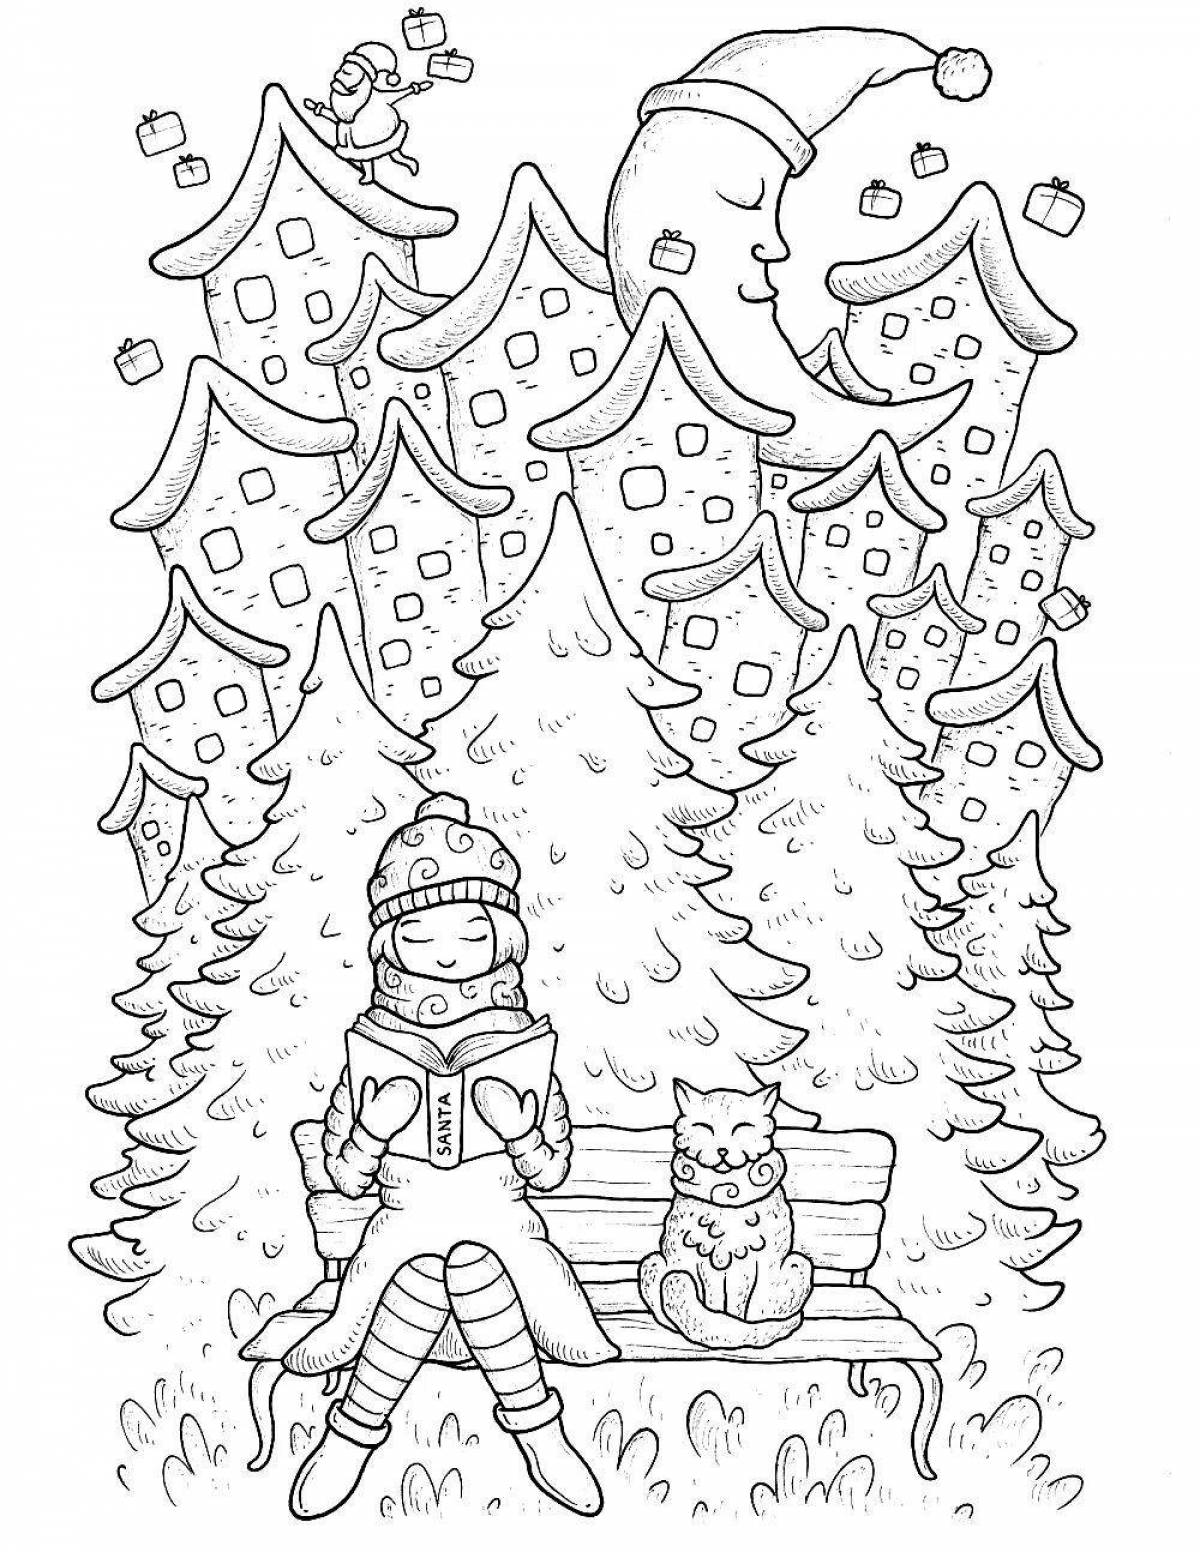 Shiny Christmas coloring book for adults